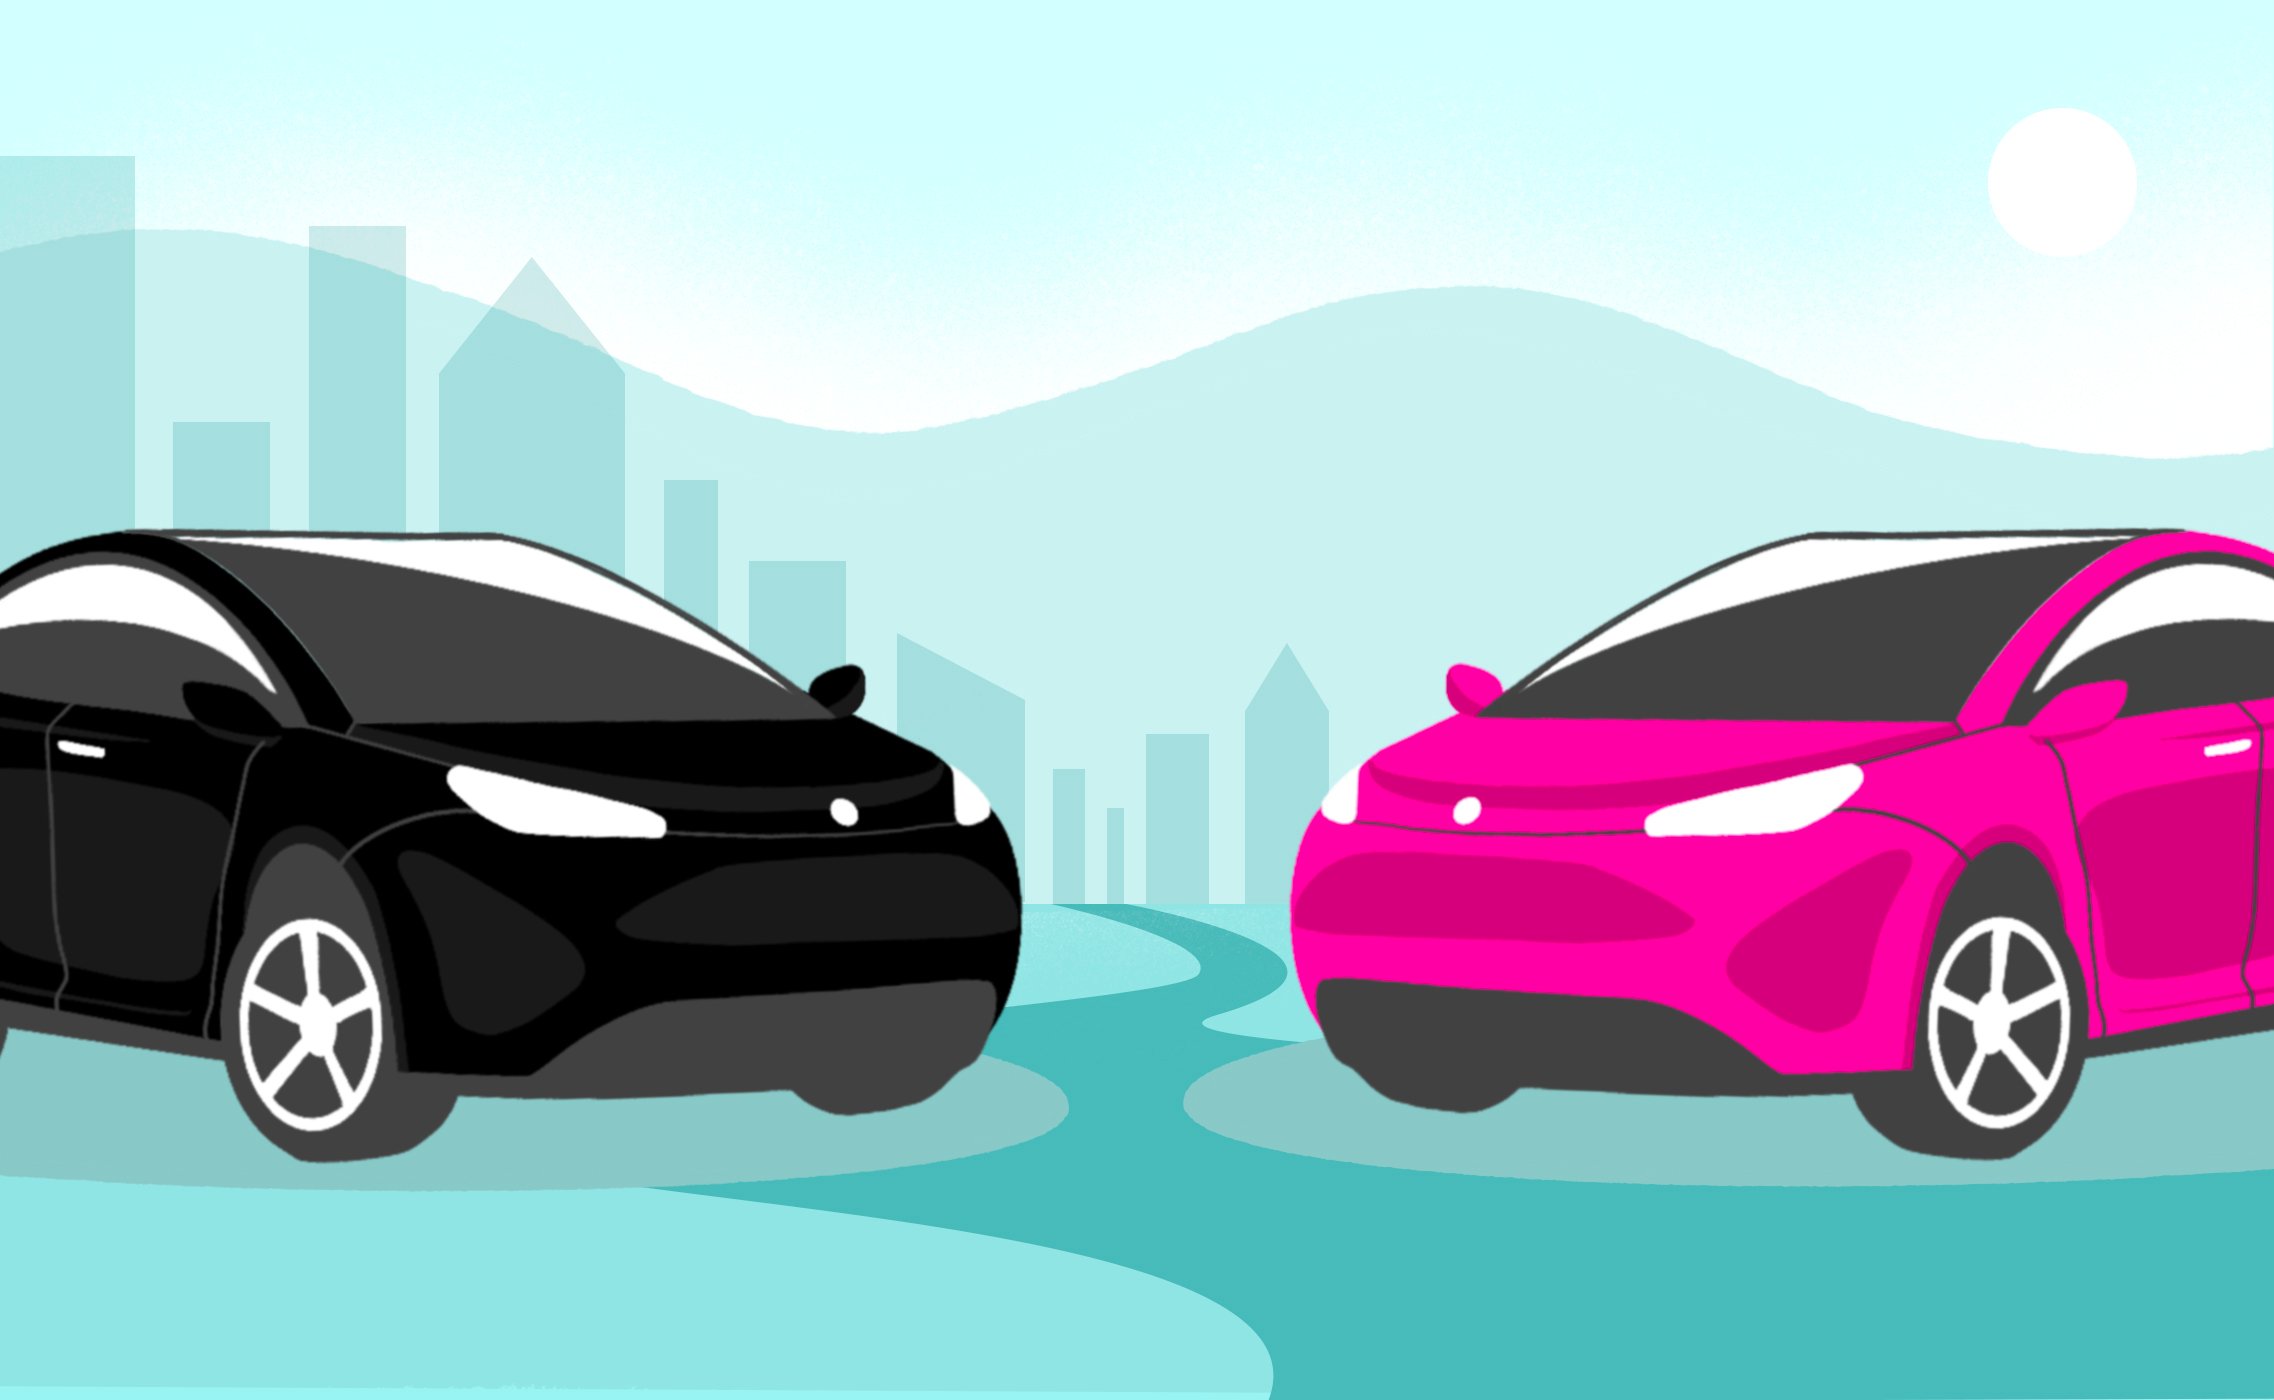 black car and pink car showing brand identity